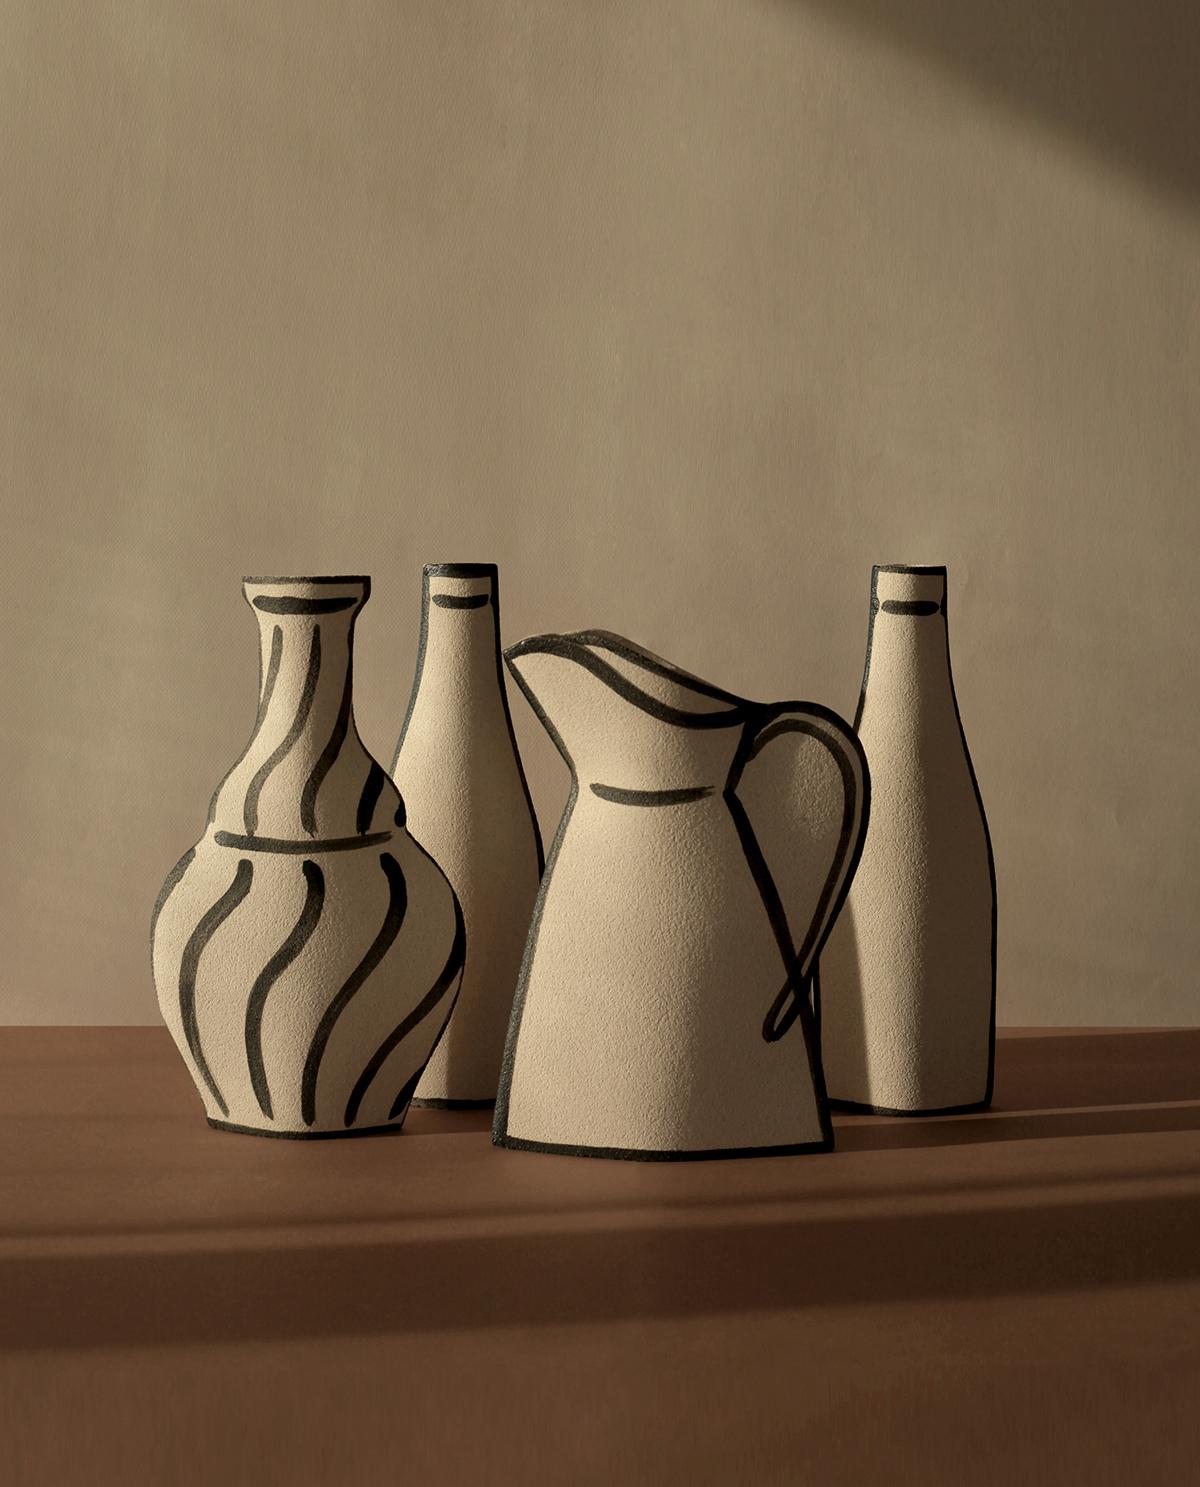 Contemporary 21st Century ‘Morandi Vase - Black’, in White Ceramic, Hand-Crafted in France For Sale